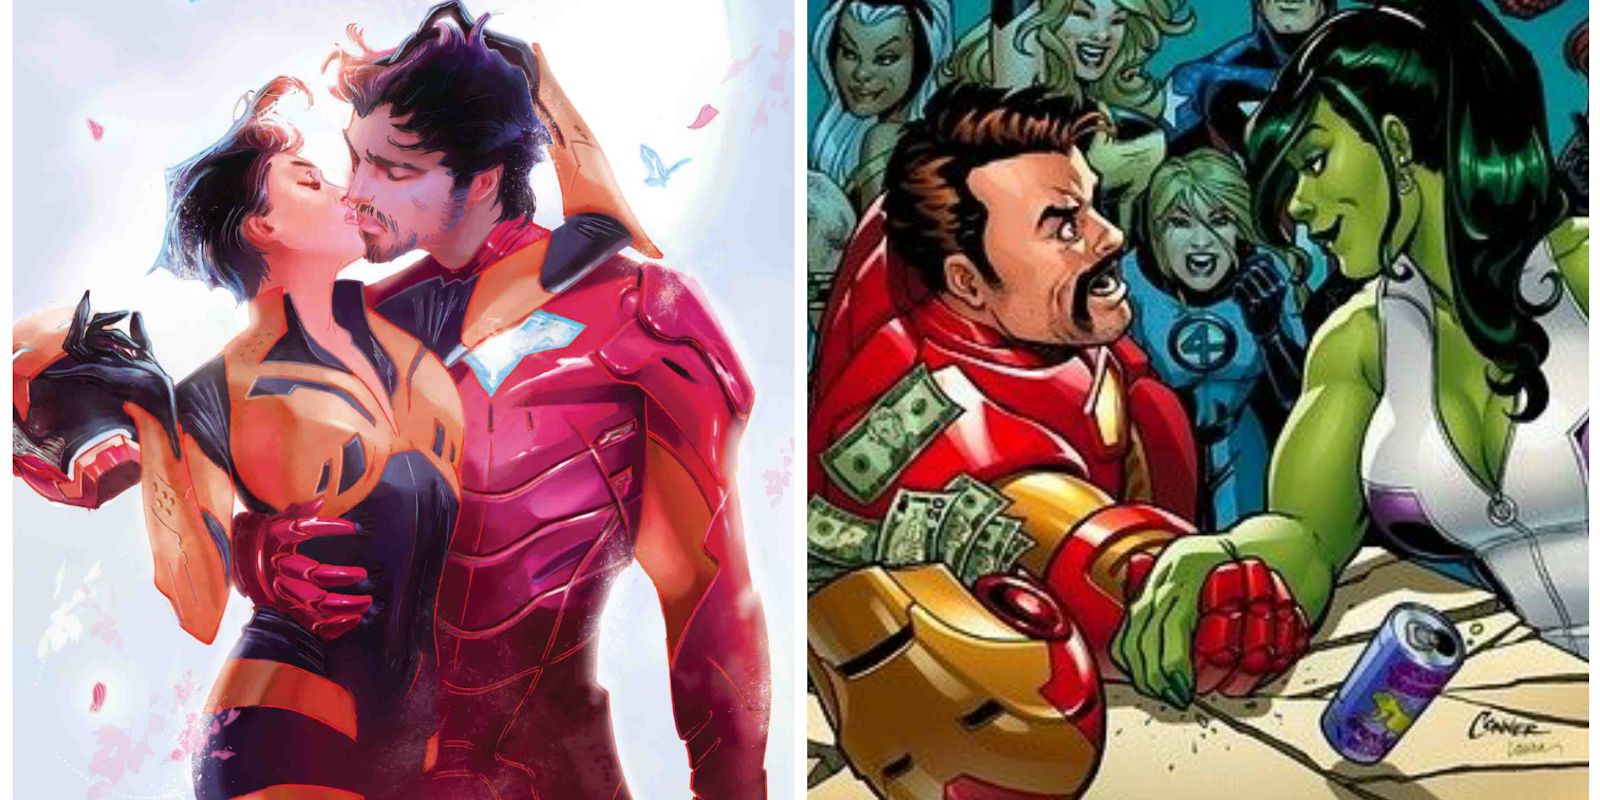 Iron Man relationships with other Marvel characters.